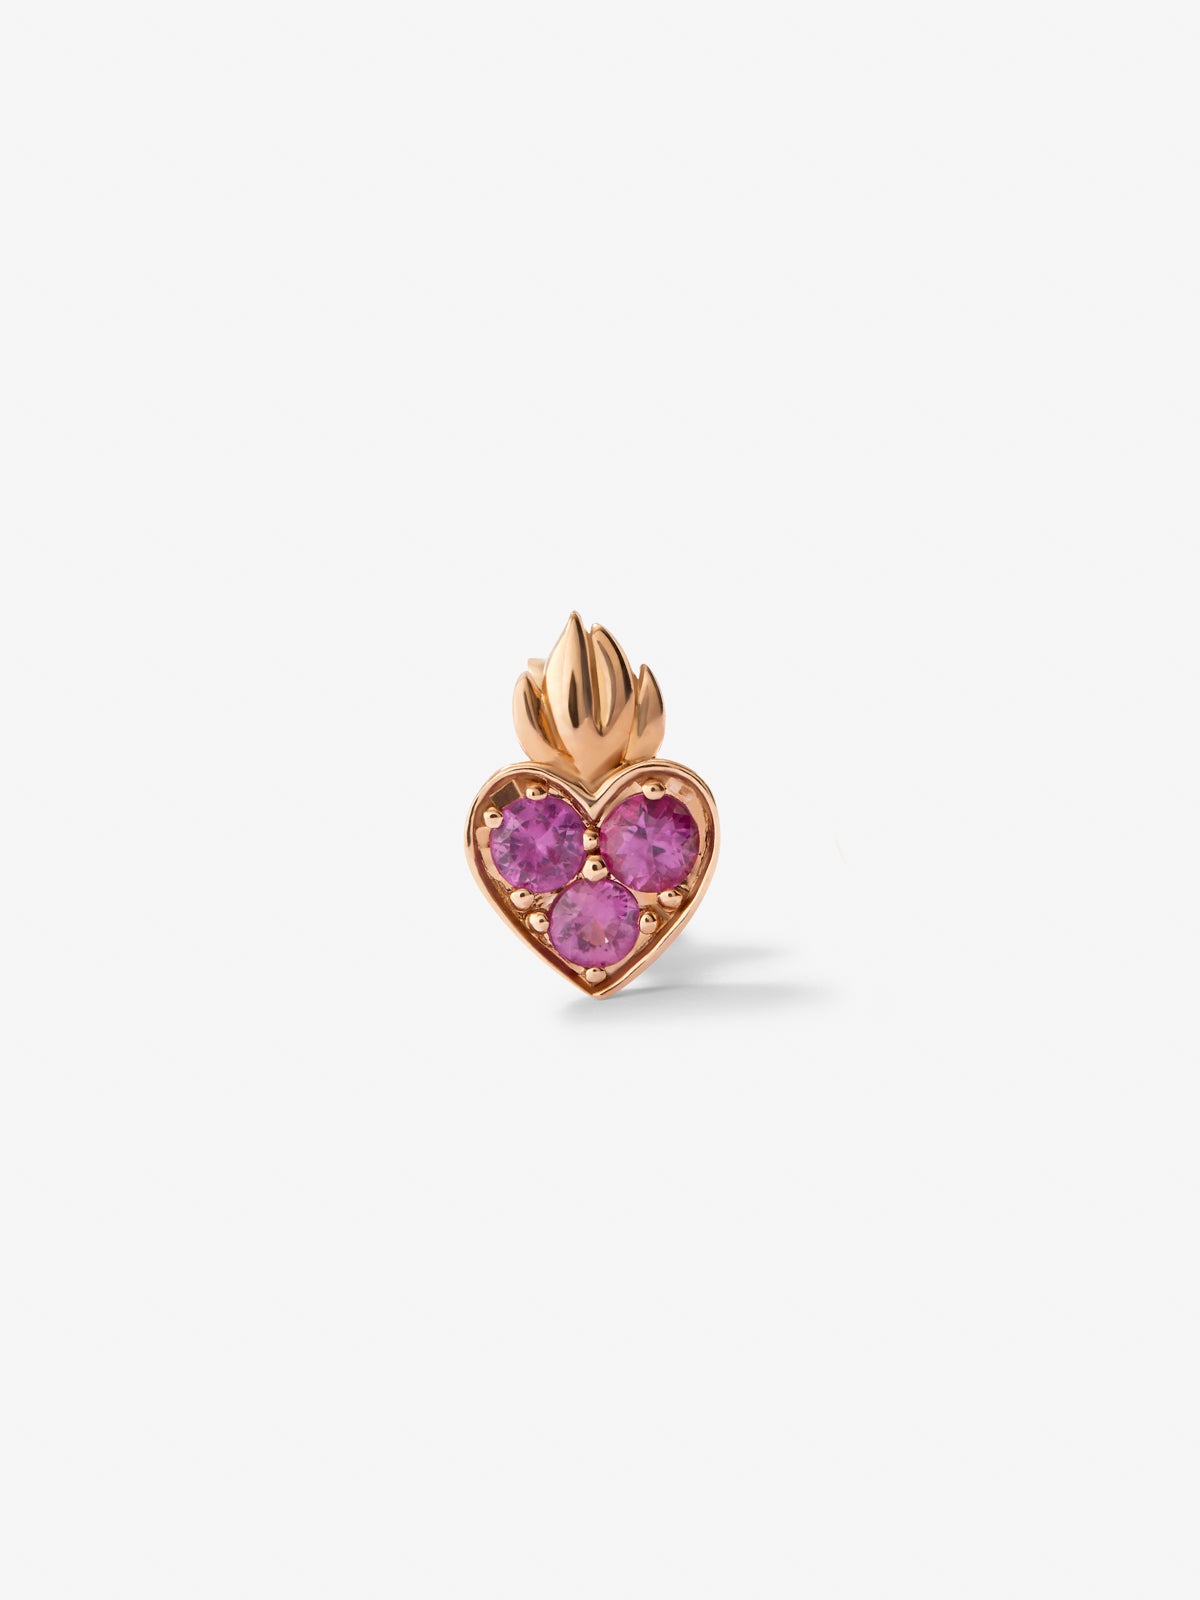 Individual 18kt rose gold heart pendant with 0.14cts pink sapphires.